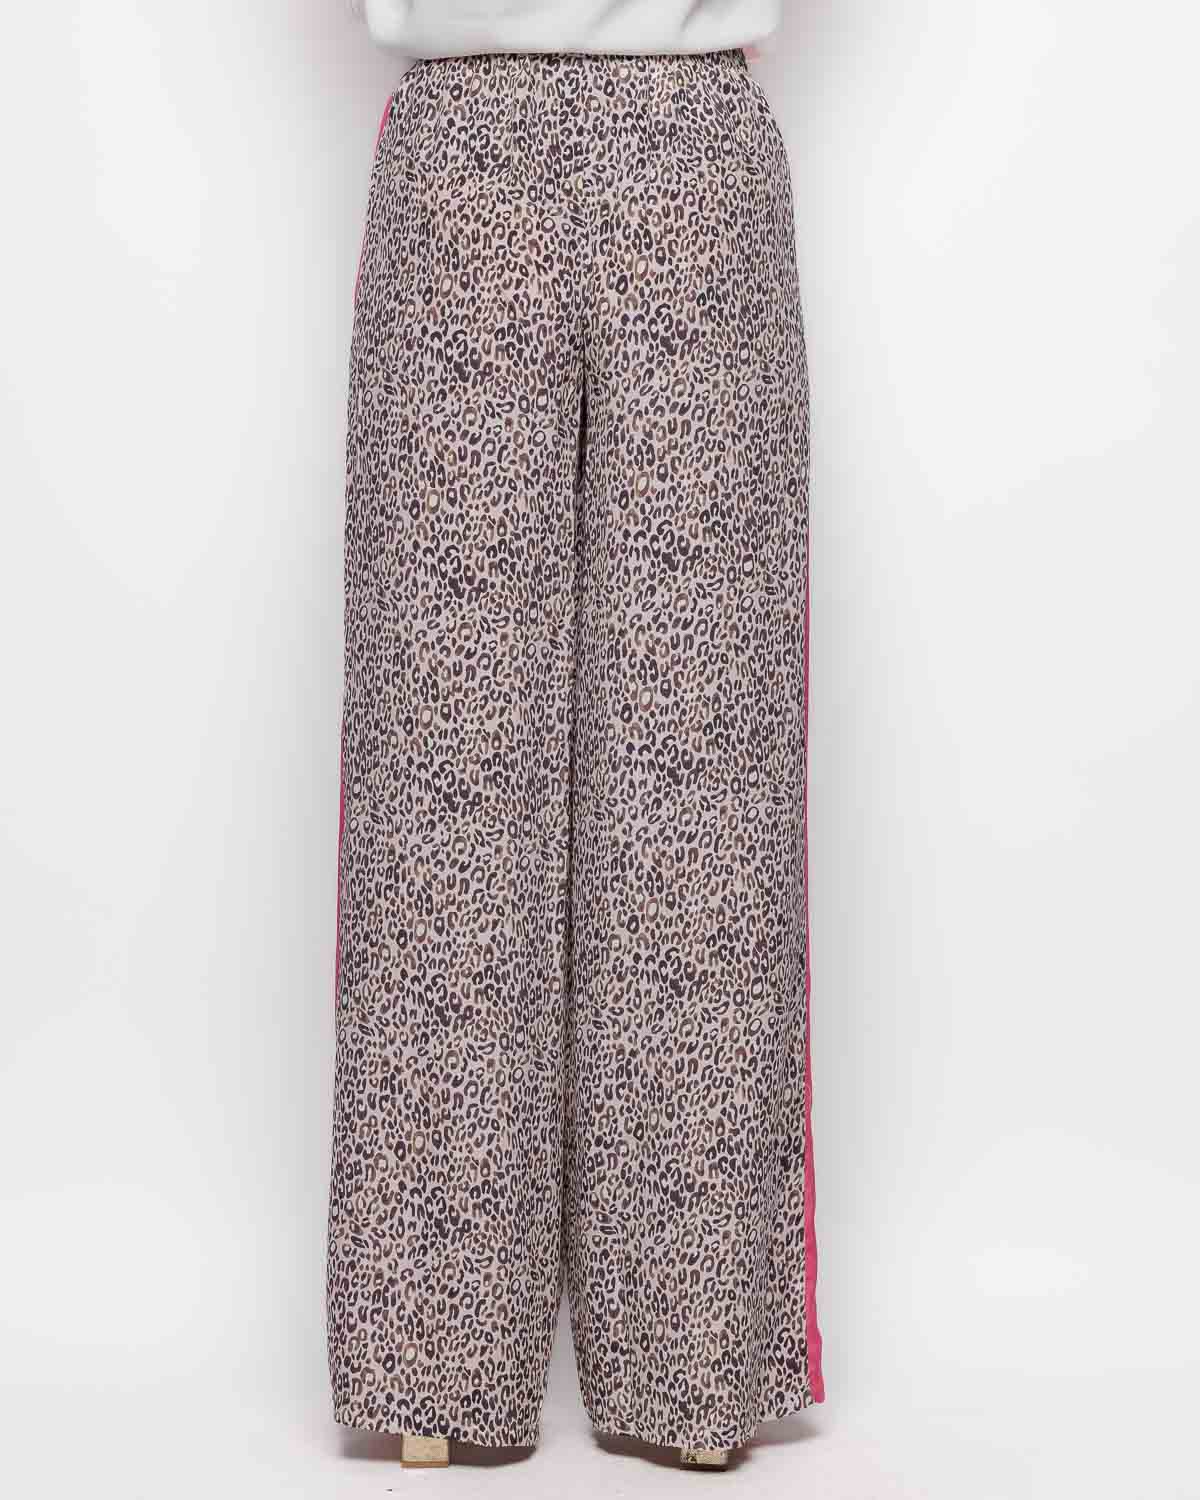 Primrose Park Kylie Trousers in Leopard with Pink Stripe